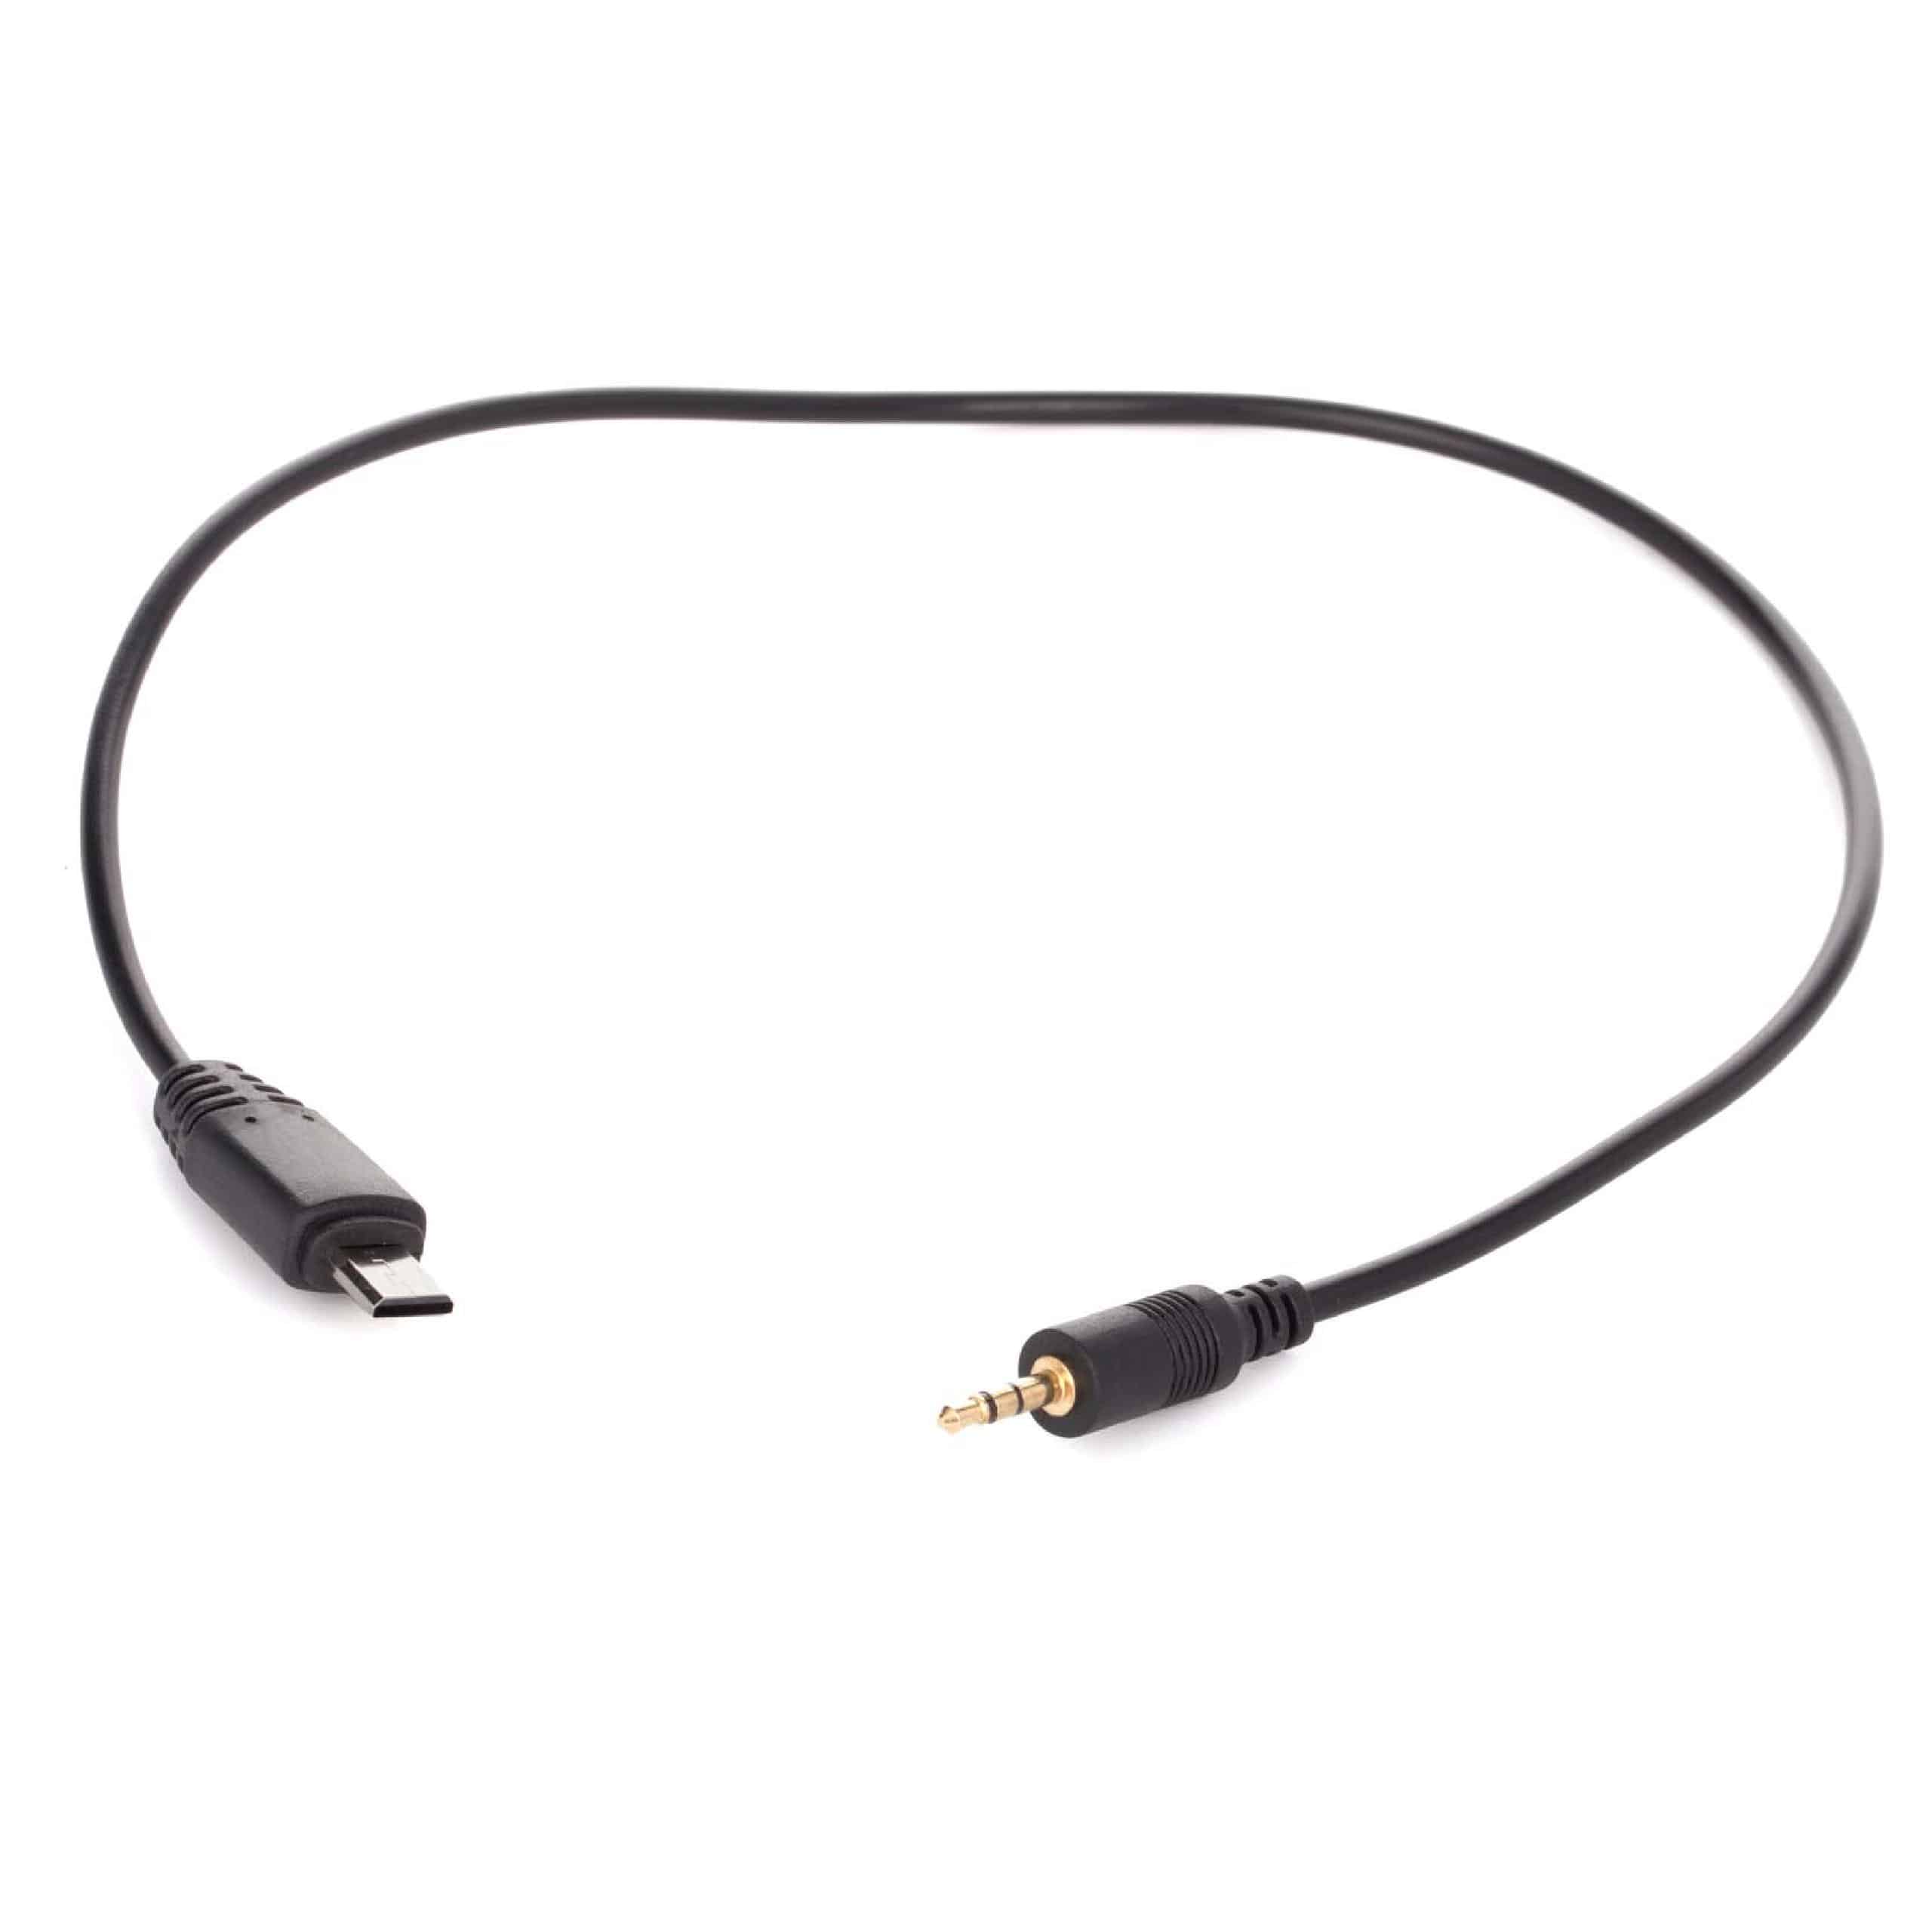 Cable for Shutter Release suitable for NEX-3NL Camera - 35 cm